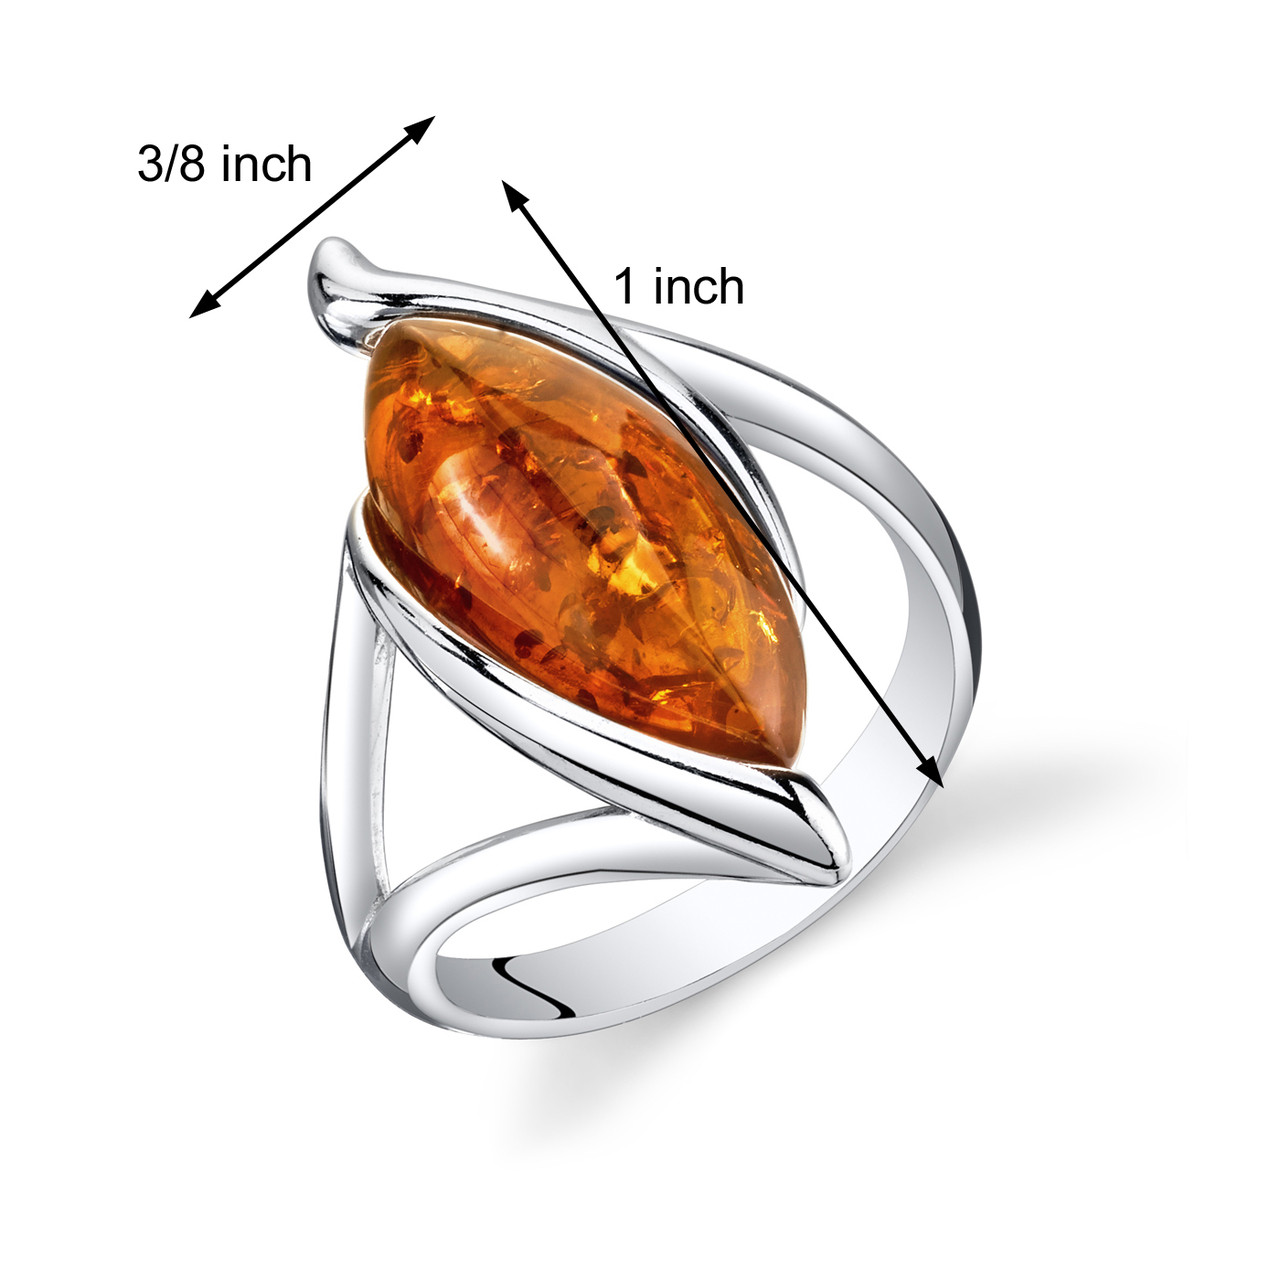 Oravo Baltic Amber Open Spiral Earrings Sterling Silver Cognac Color